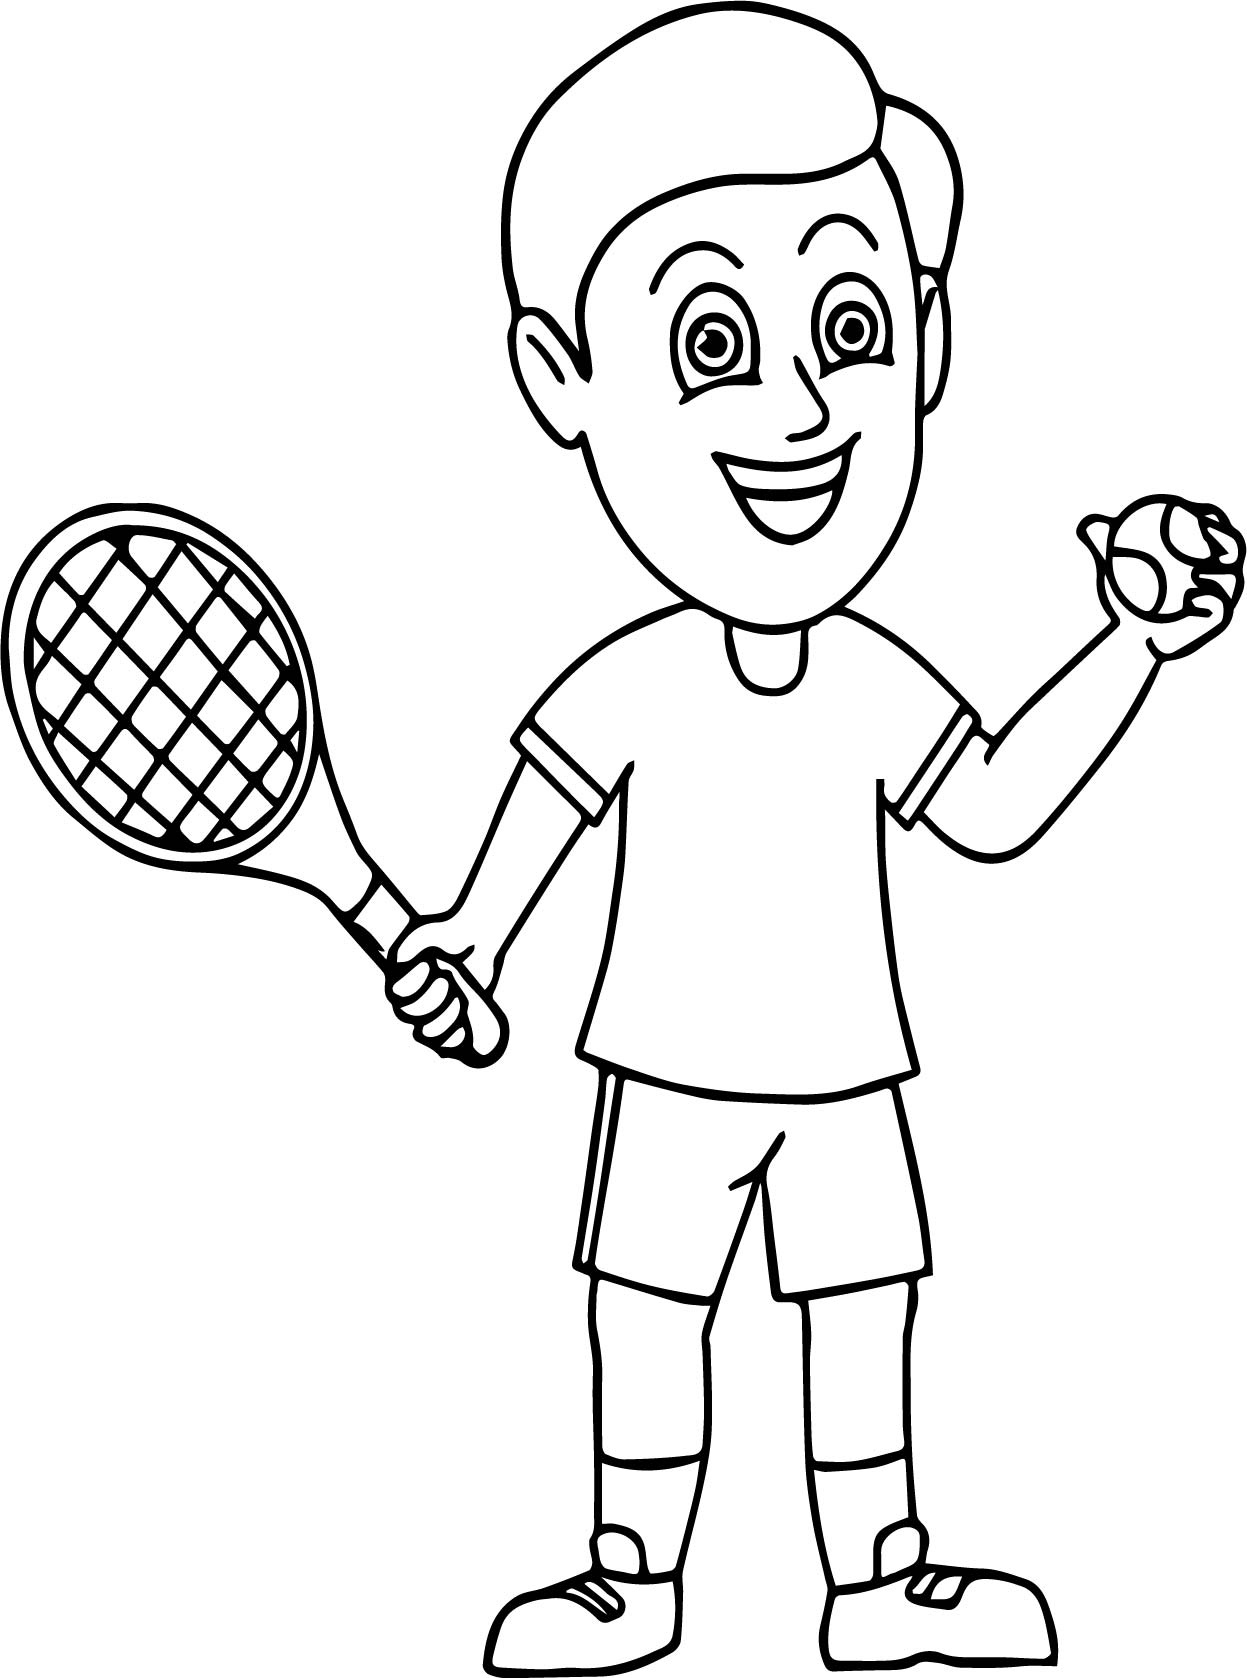 Boy Ready To Serve Tennis Coloring Page